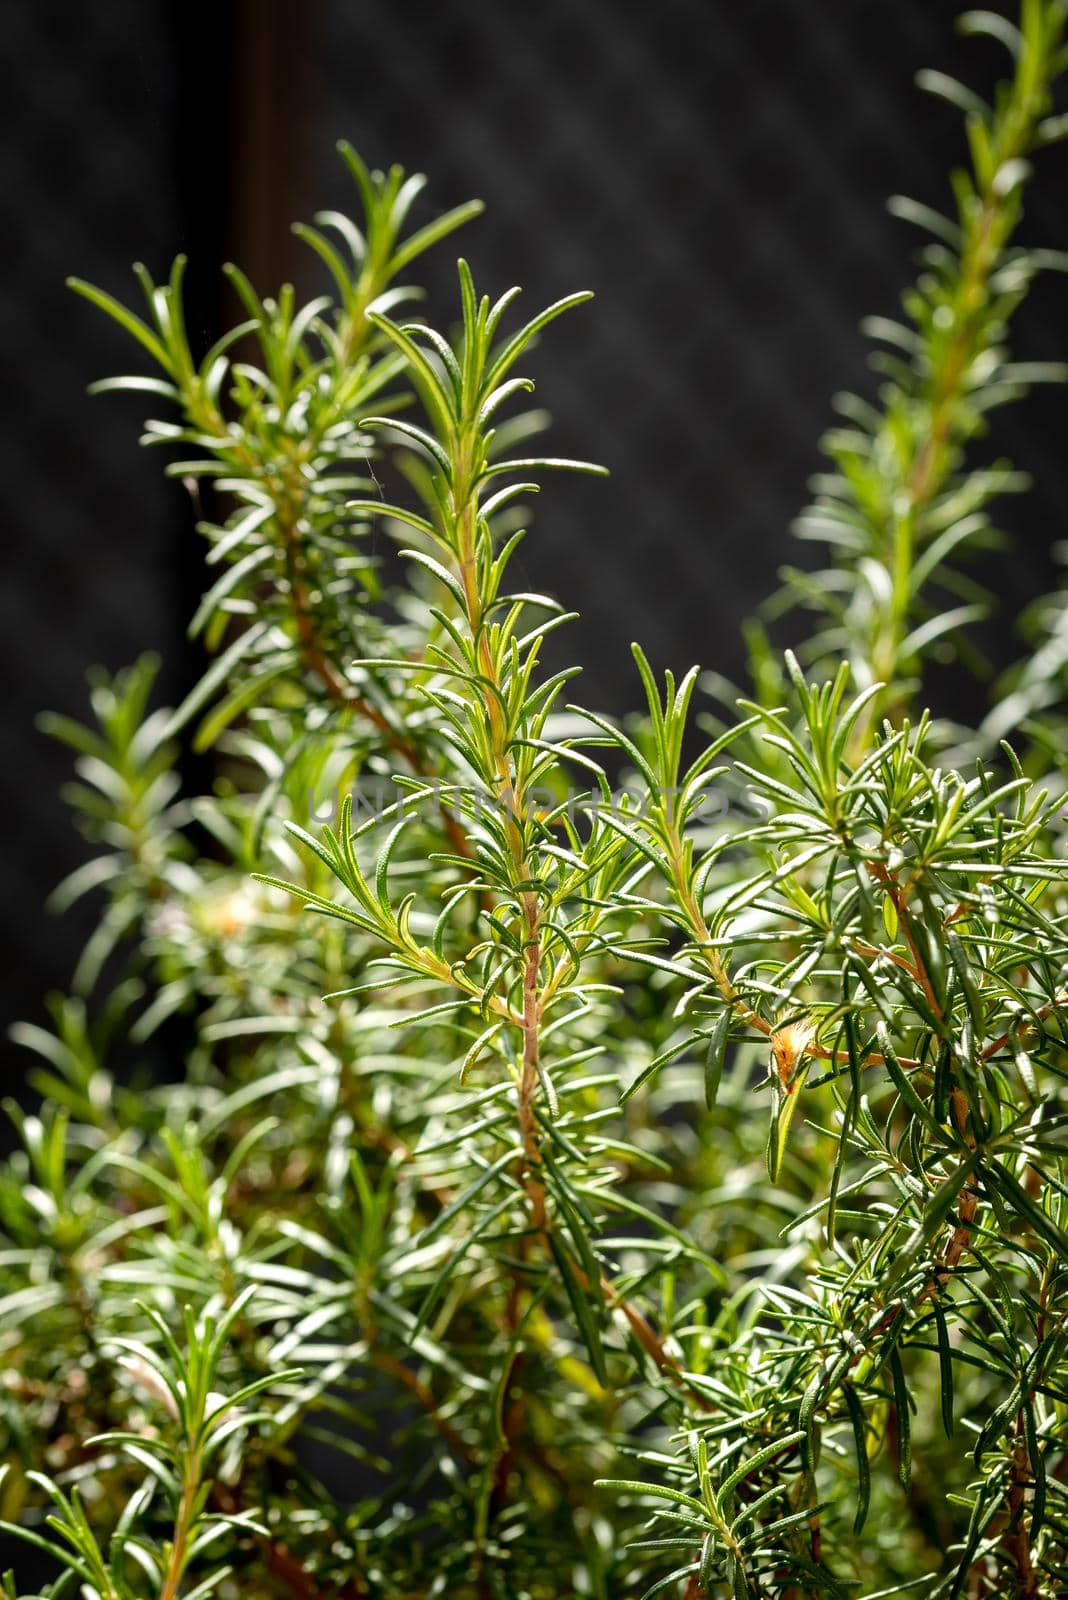 Closeup of a Rosemary plant in Italy during spring. Rosemary is an excellent plant to be used a seasoning for cooking and has also good medicinal properties